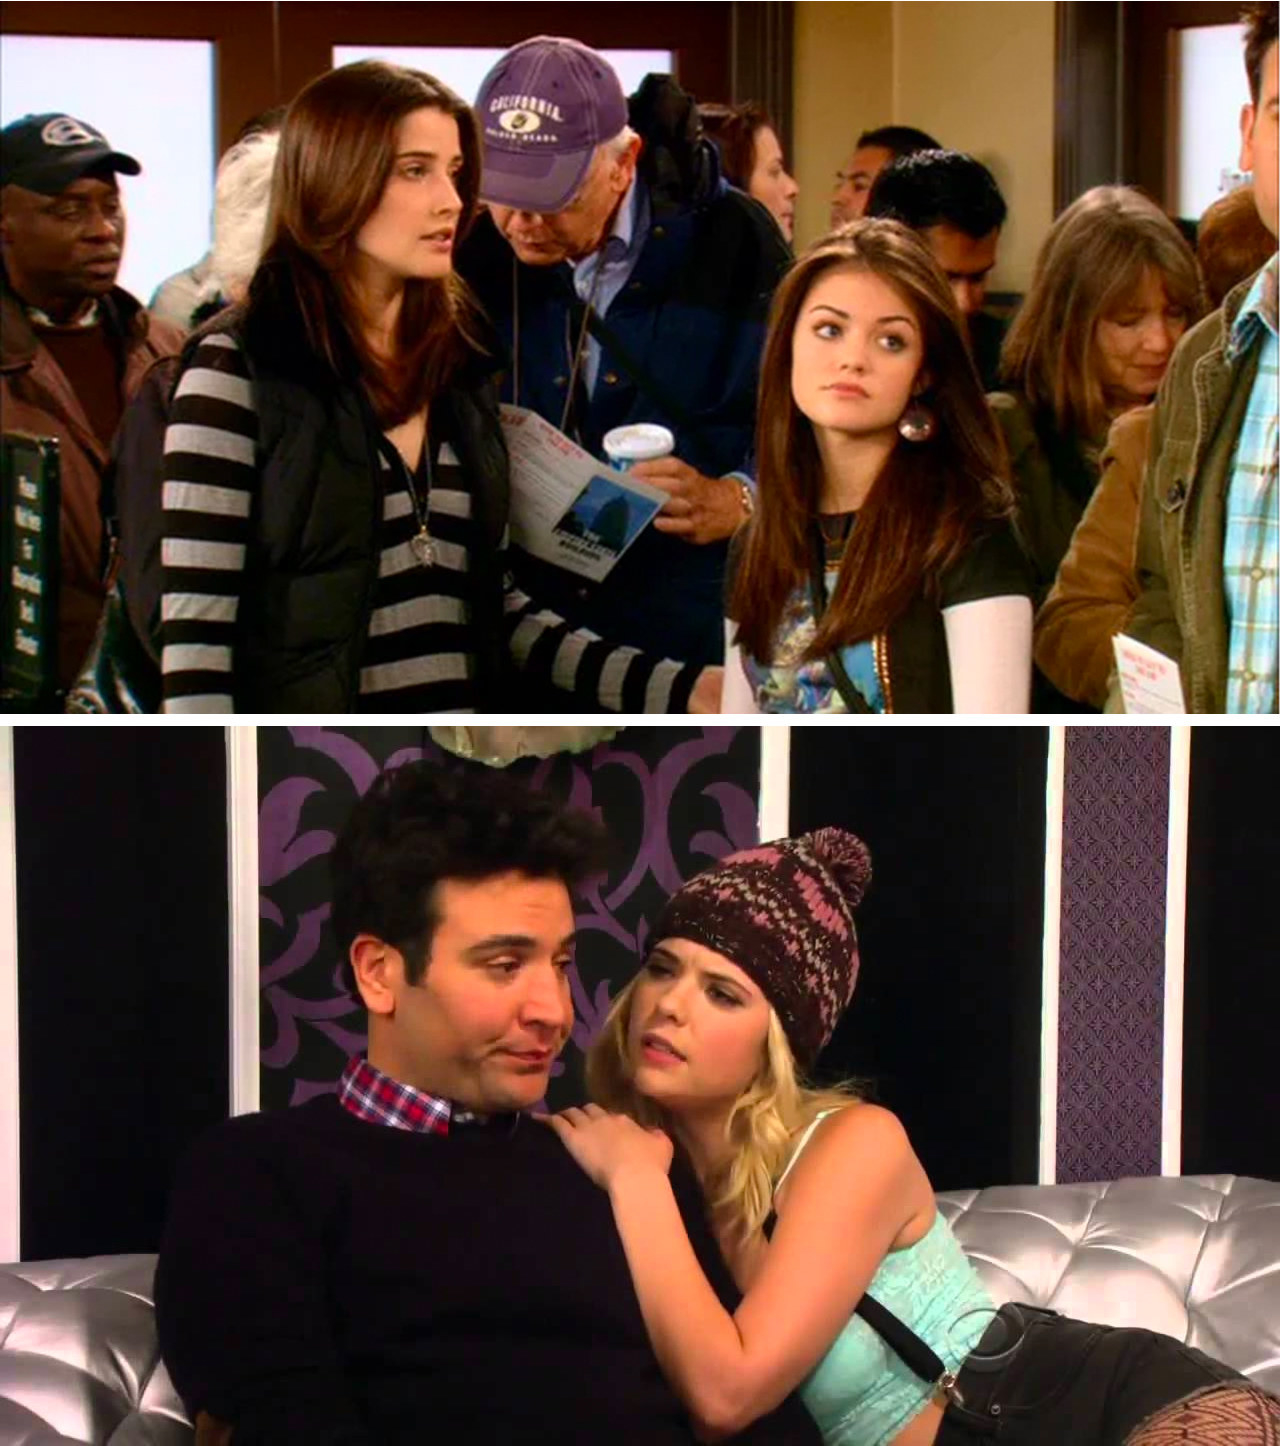 Two images: a young Lucy Hale standing beside Robyn from How I Met Your Mother, and a young Ashley Benson cuddling Ted from How I Met Your Mother